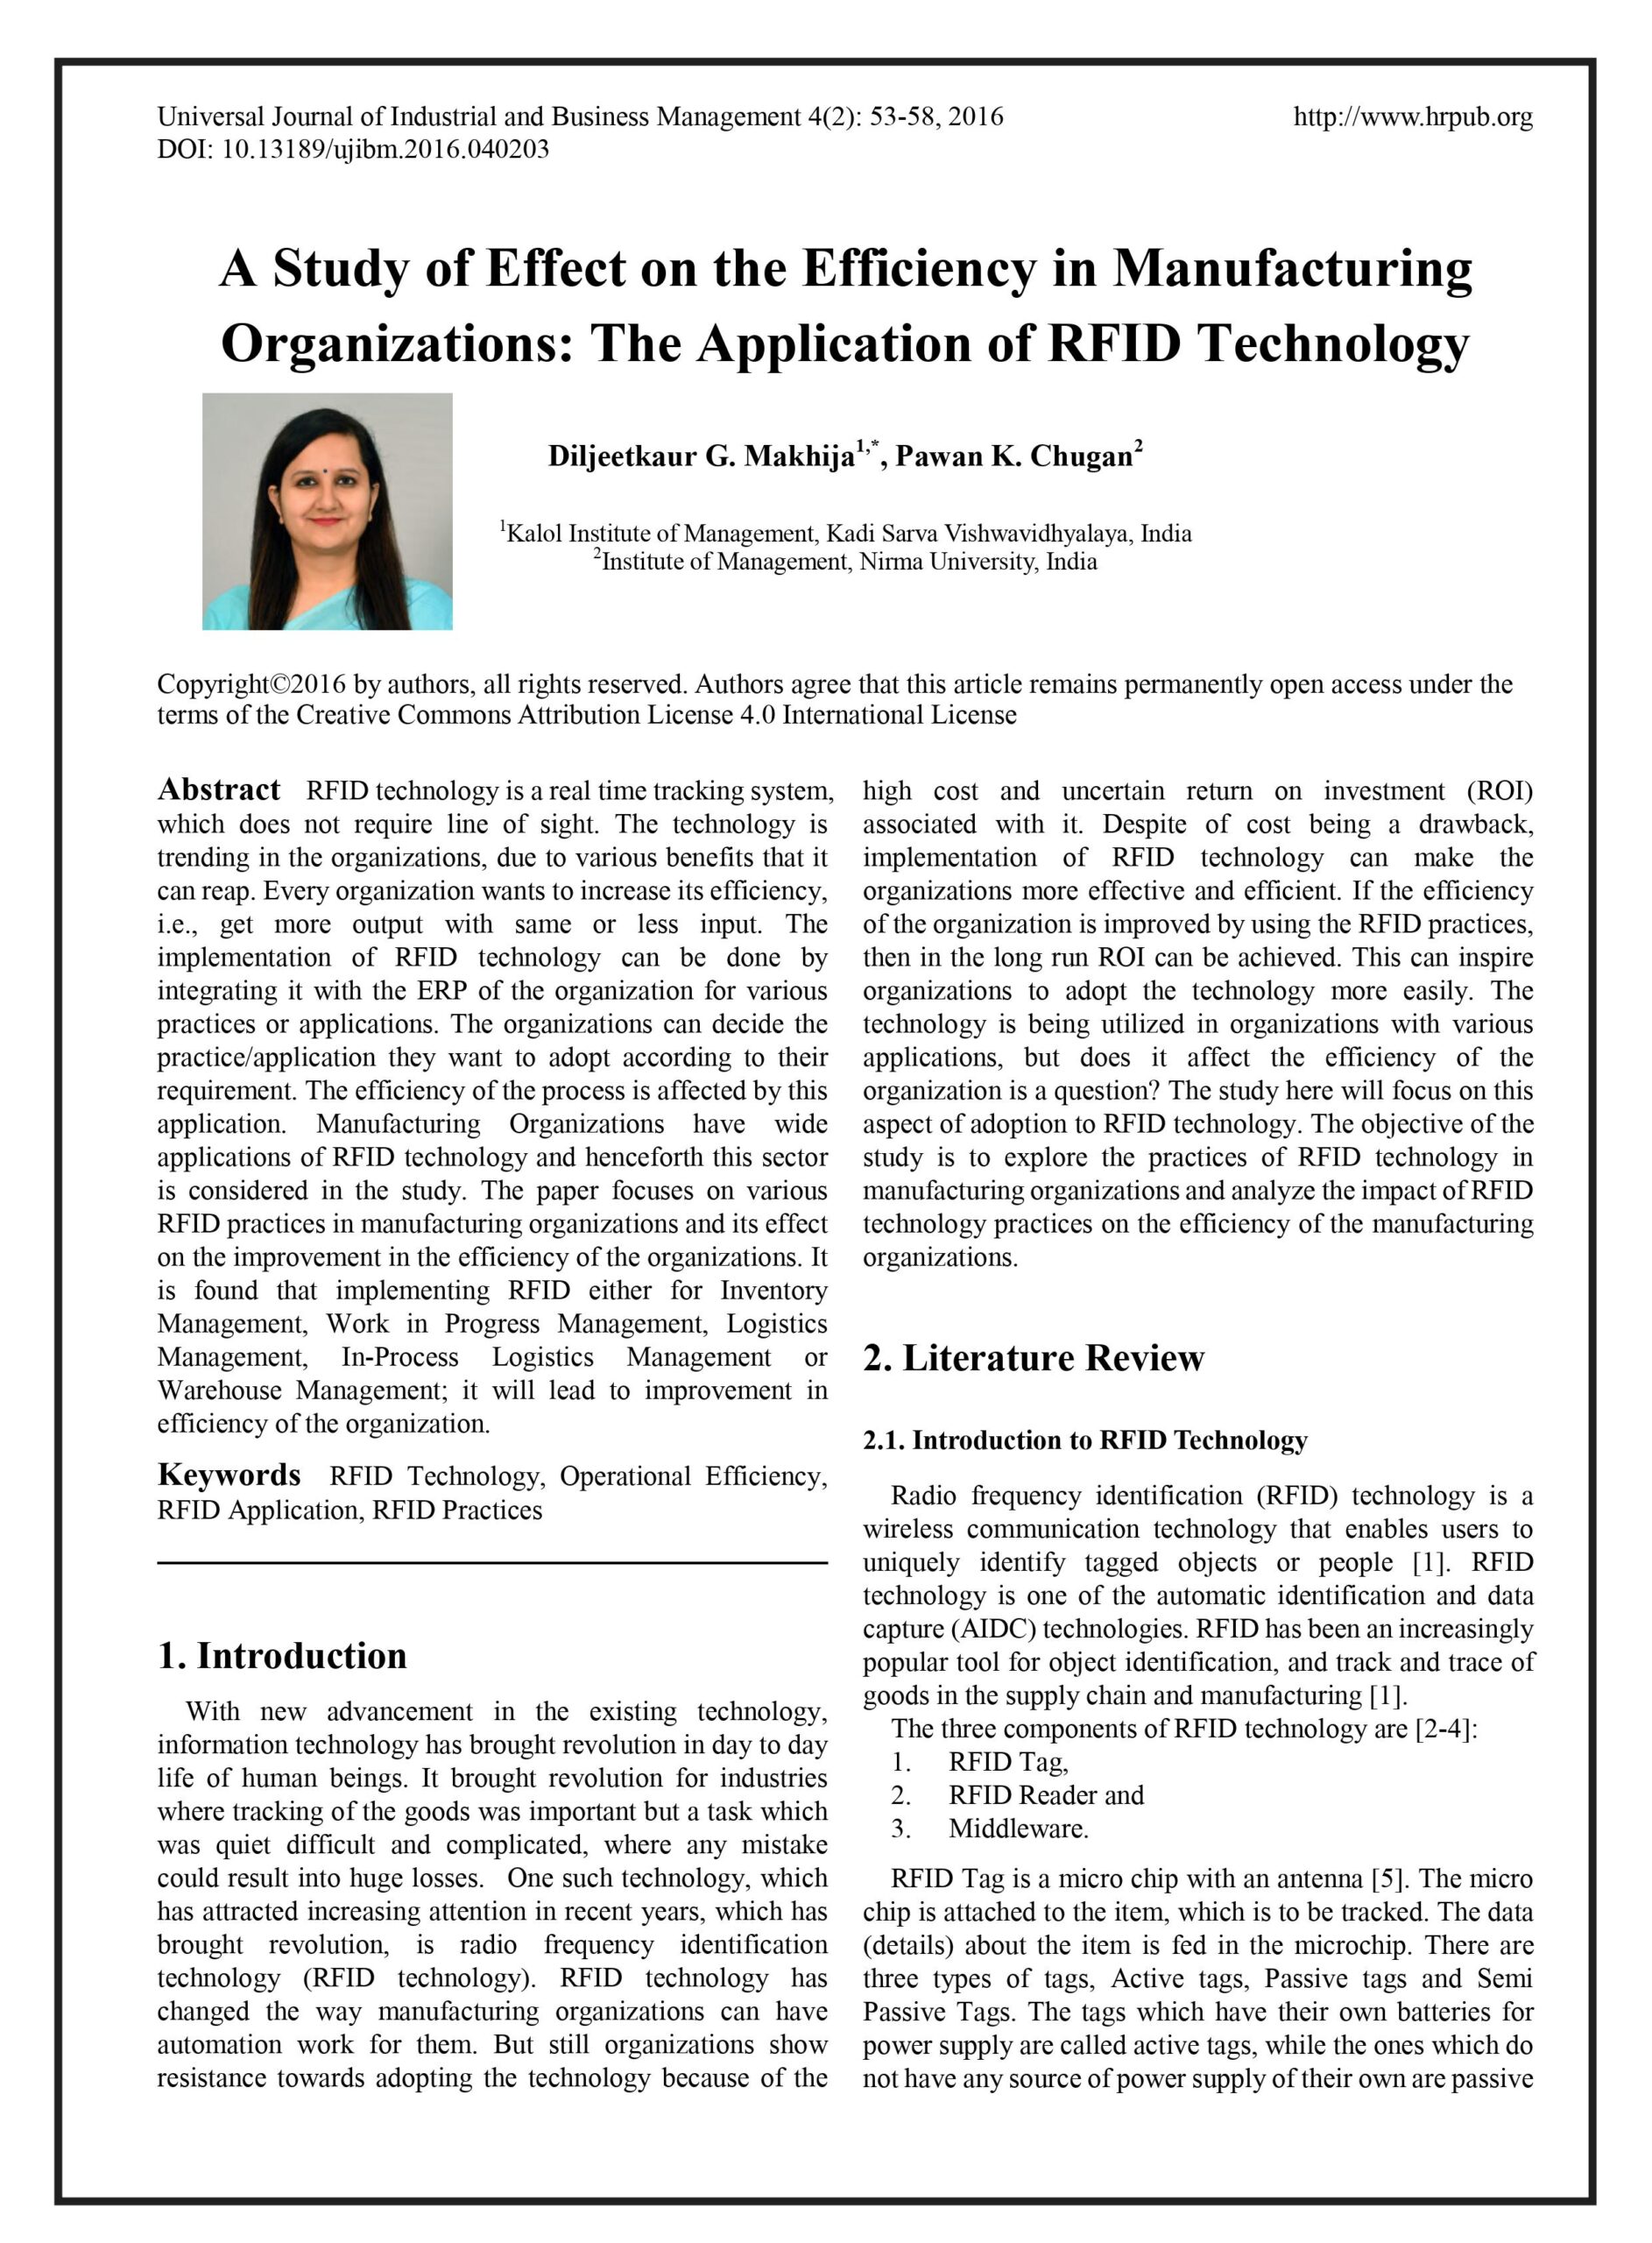 A Study of Effect on the Efficiency in Manufacturing Organizations: The Application of RFID Technology